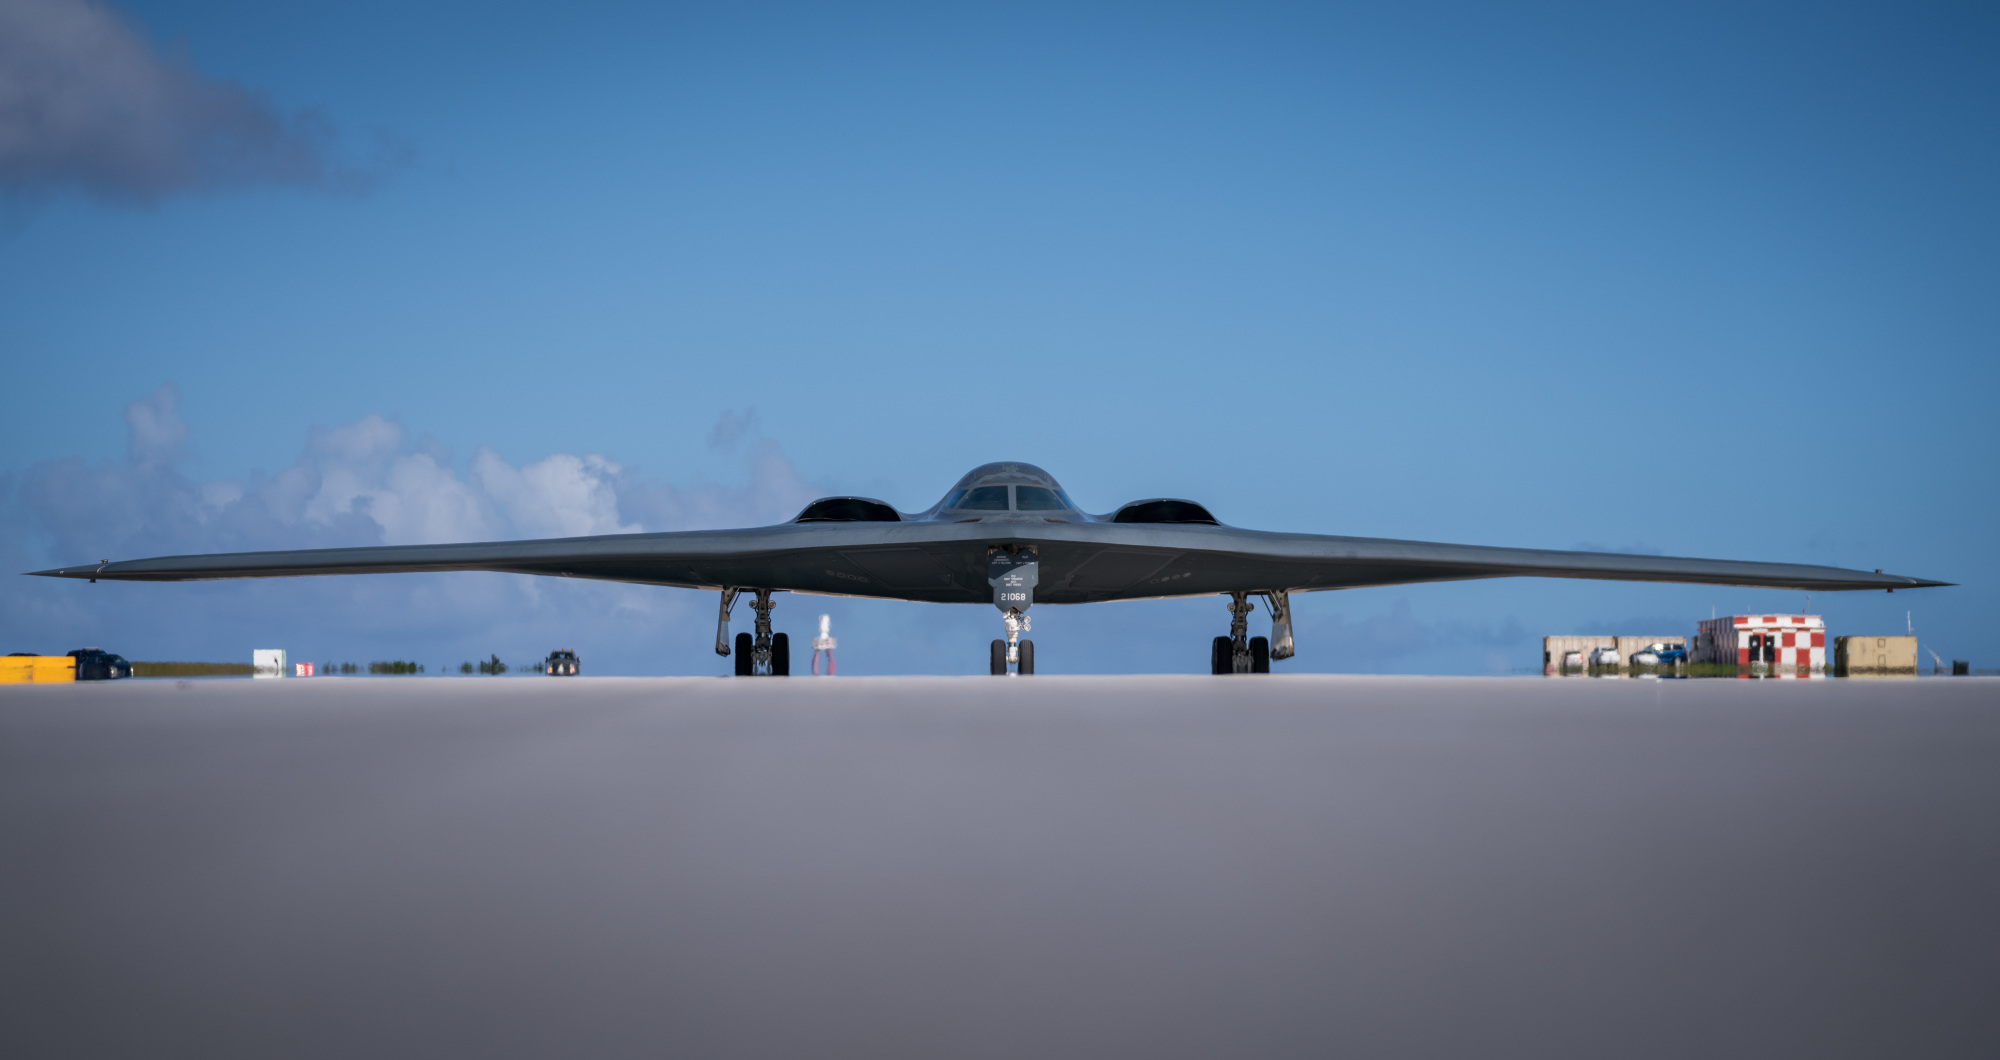 A B-2 stealth bomber Spirit taxis on the runway at Andersen Air Force Base on the U.S. territory of Guam on Jan. 8. | PACIFIC AIR FORCES PUBLIC AFFAIRS